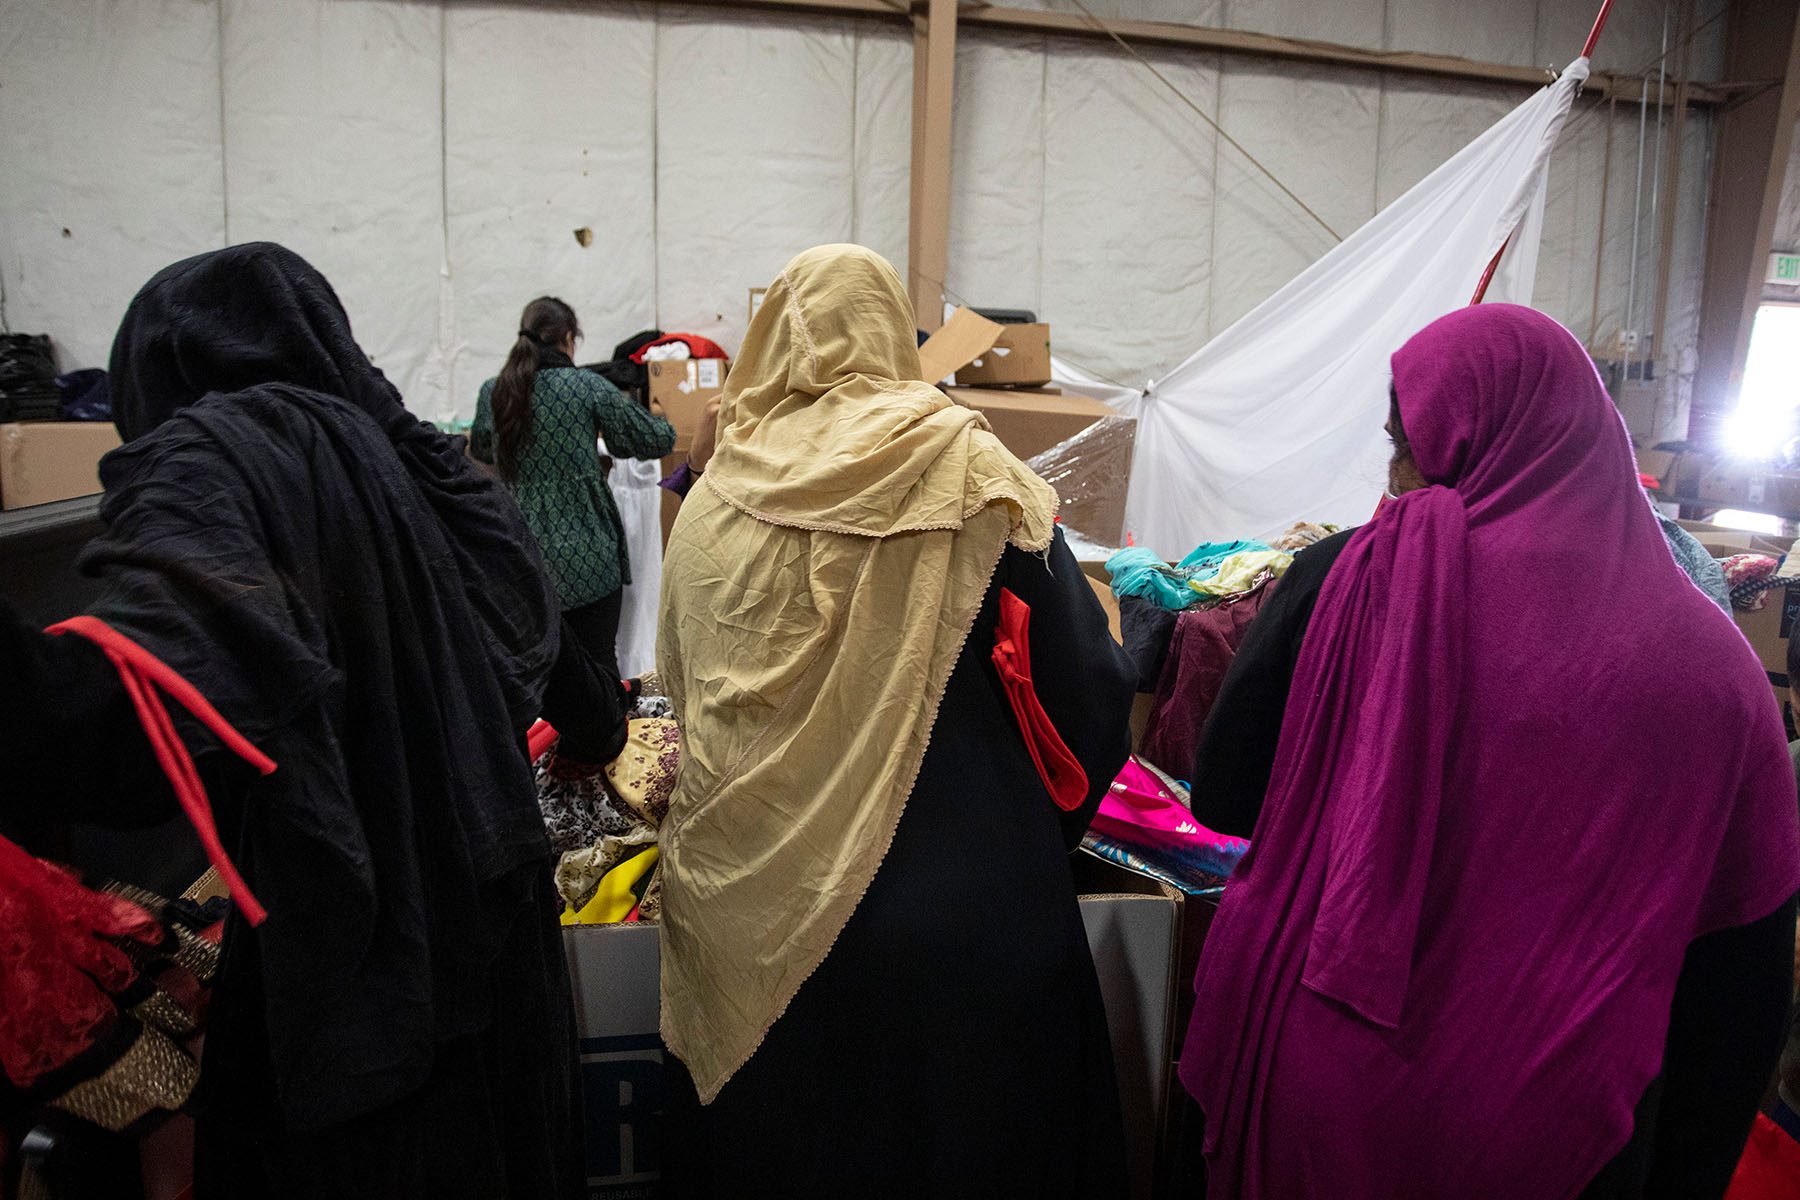 Afghan refugees look through donated clothing and shoes bins.